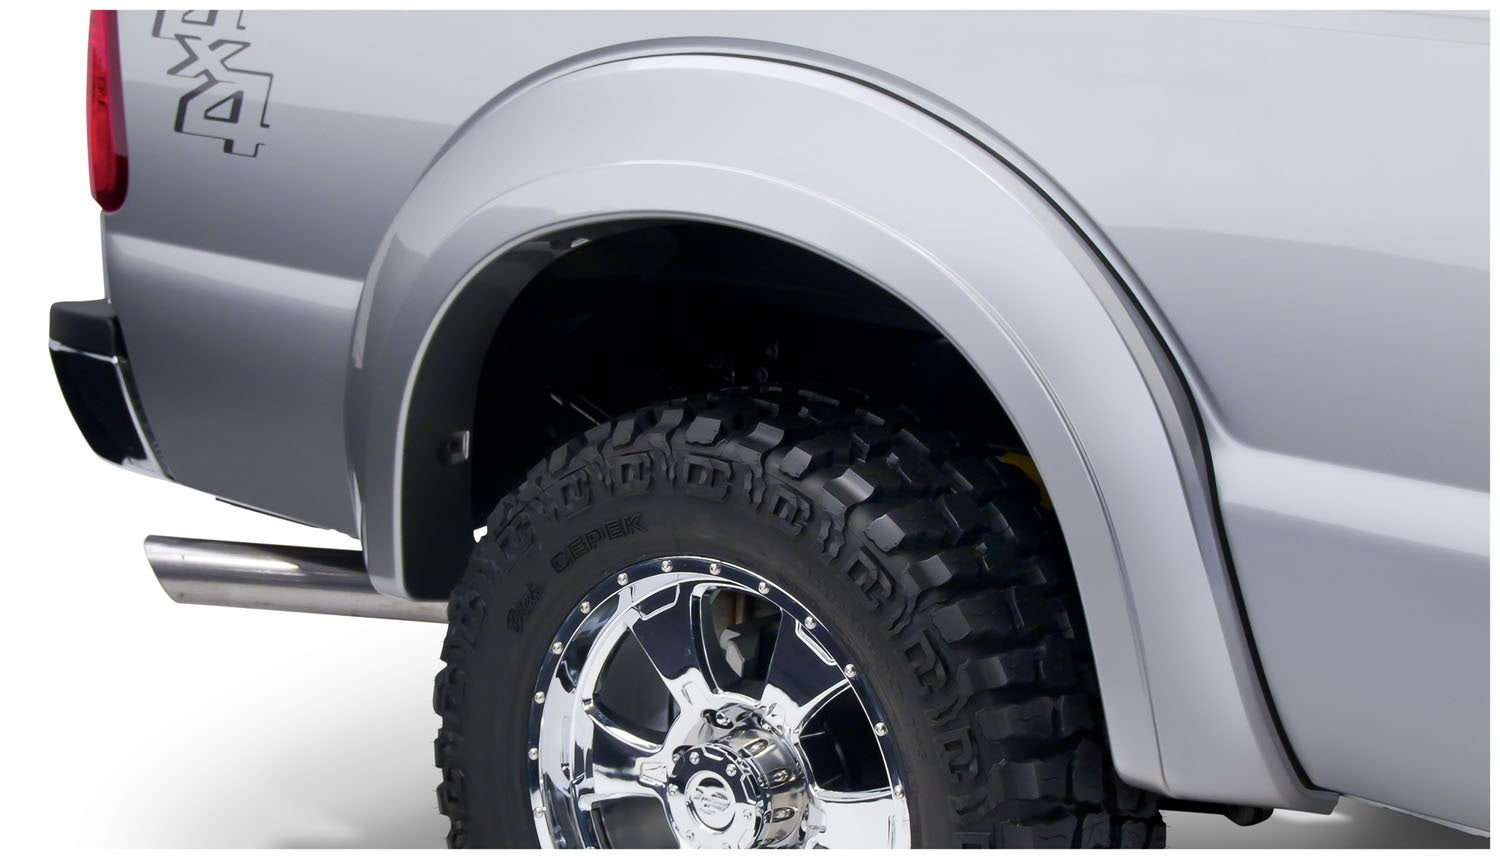 Bushwacker 20086-02 Black Extend-A-Fender Style Smooth Finish Rear Fender Flares for 2011-2016 Ford F-250 & F-350 Super Duty (Excludes Dually)